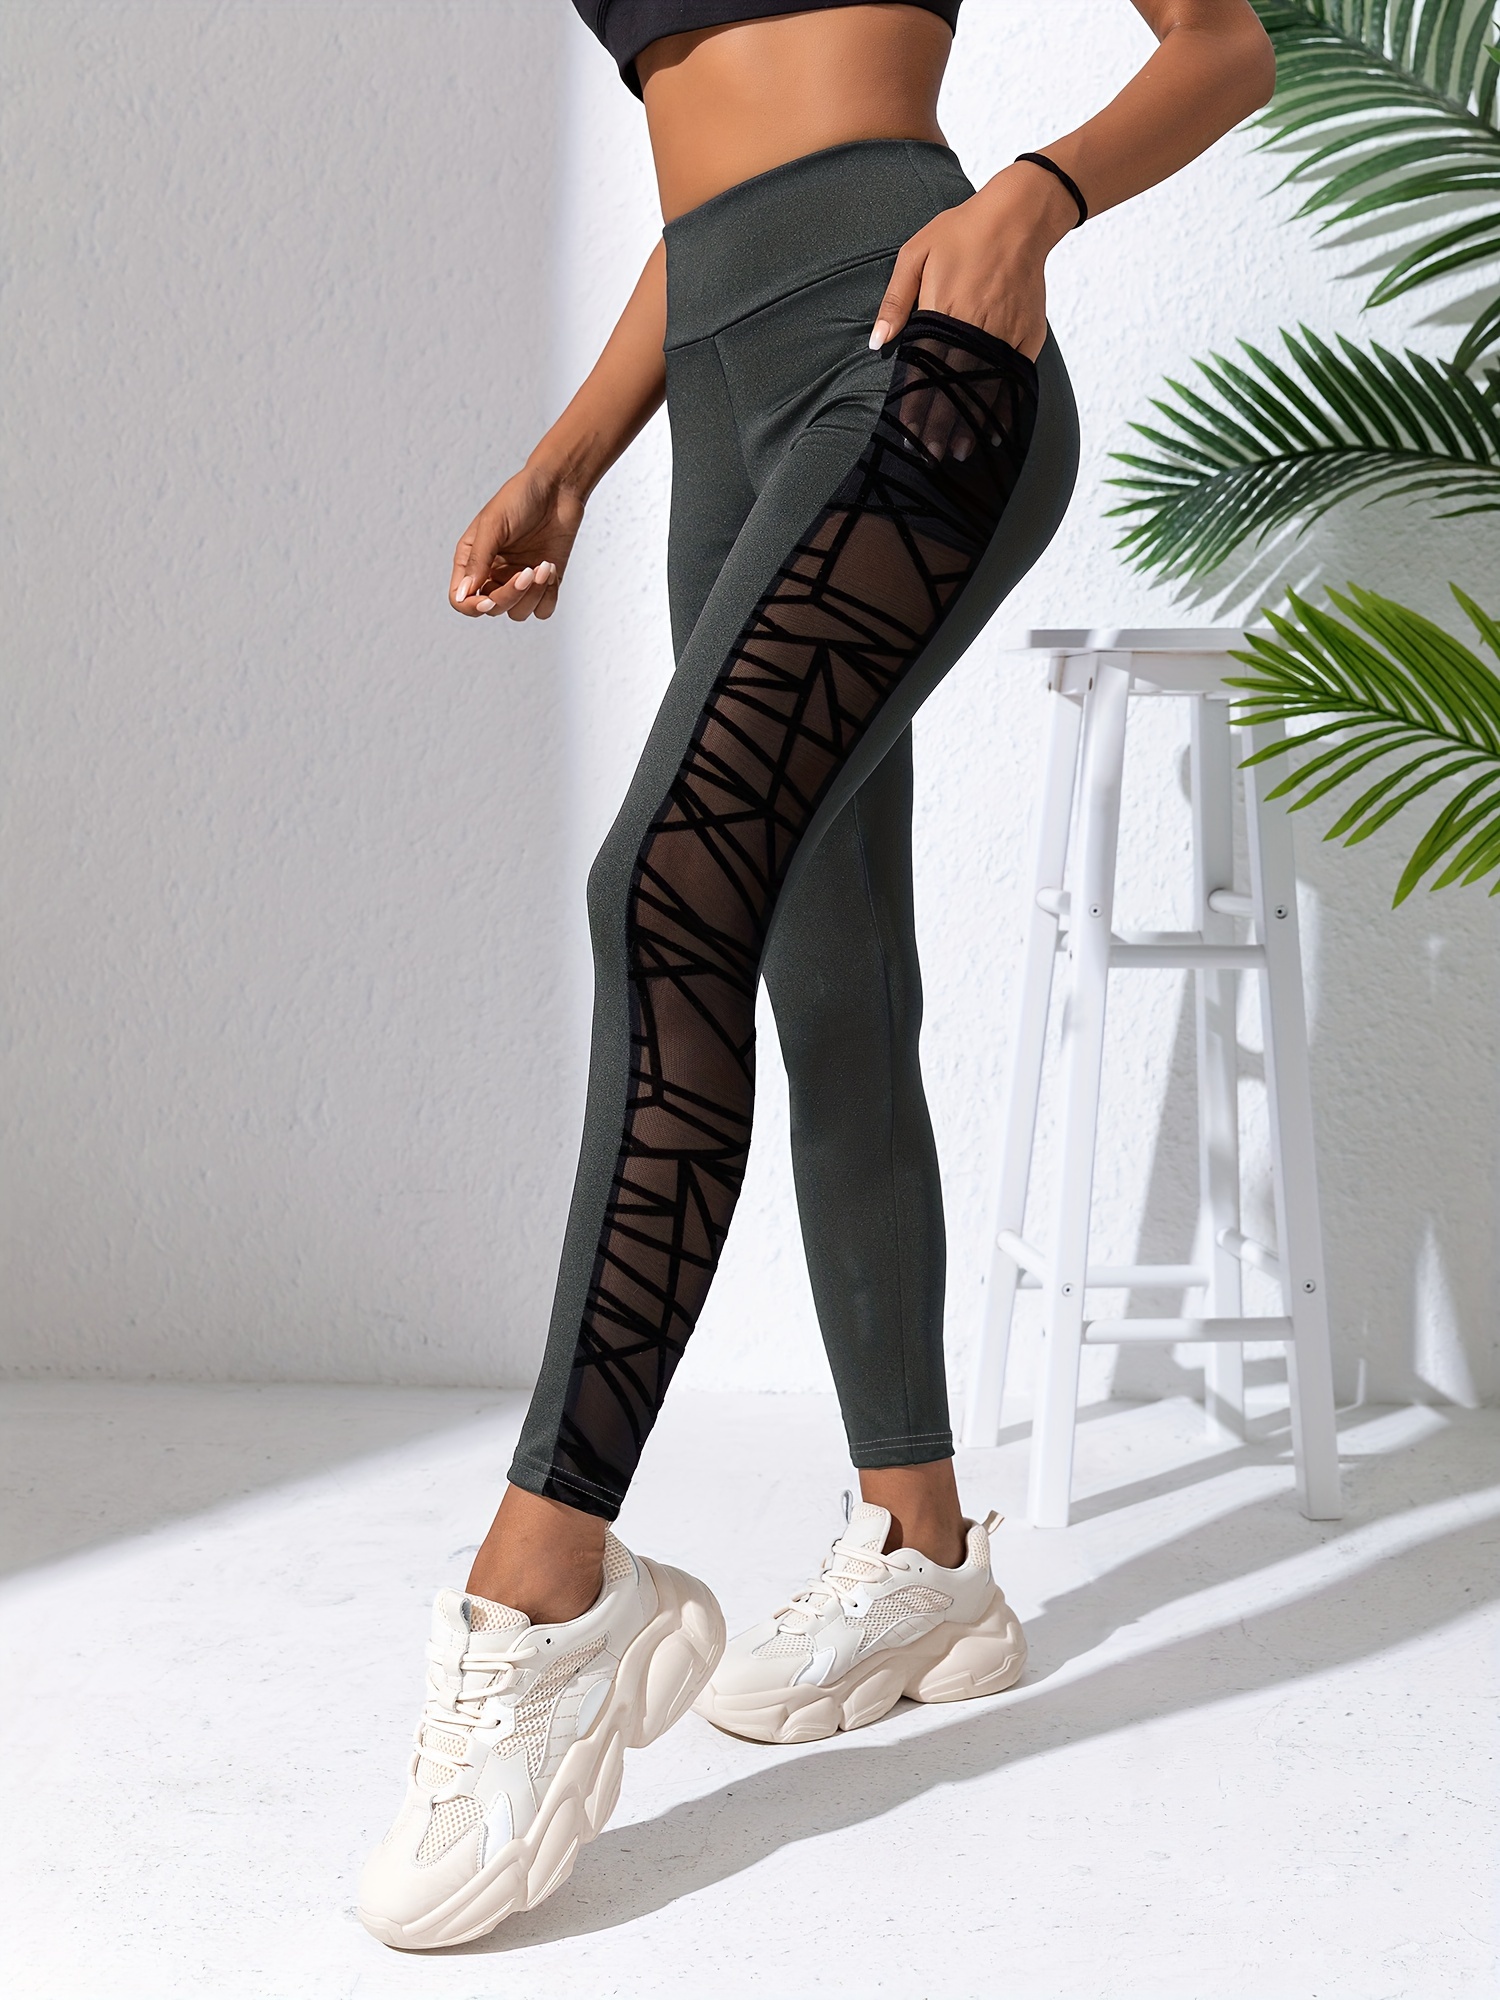  Leggings for Women with Pockets,High Waisted Butt